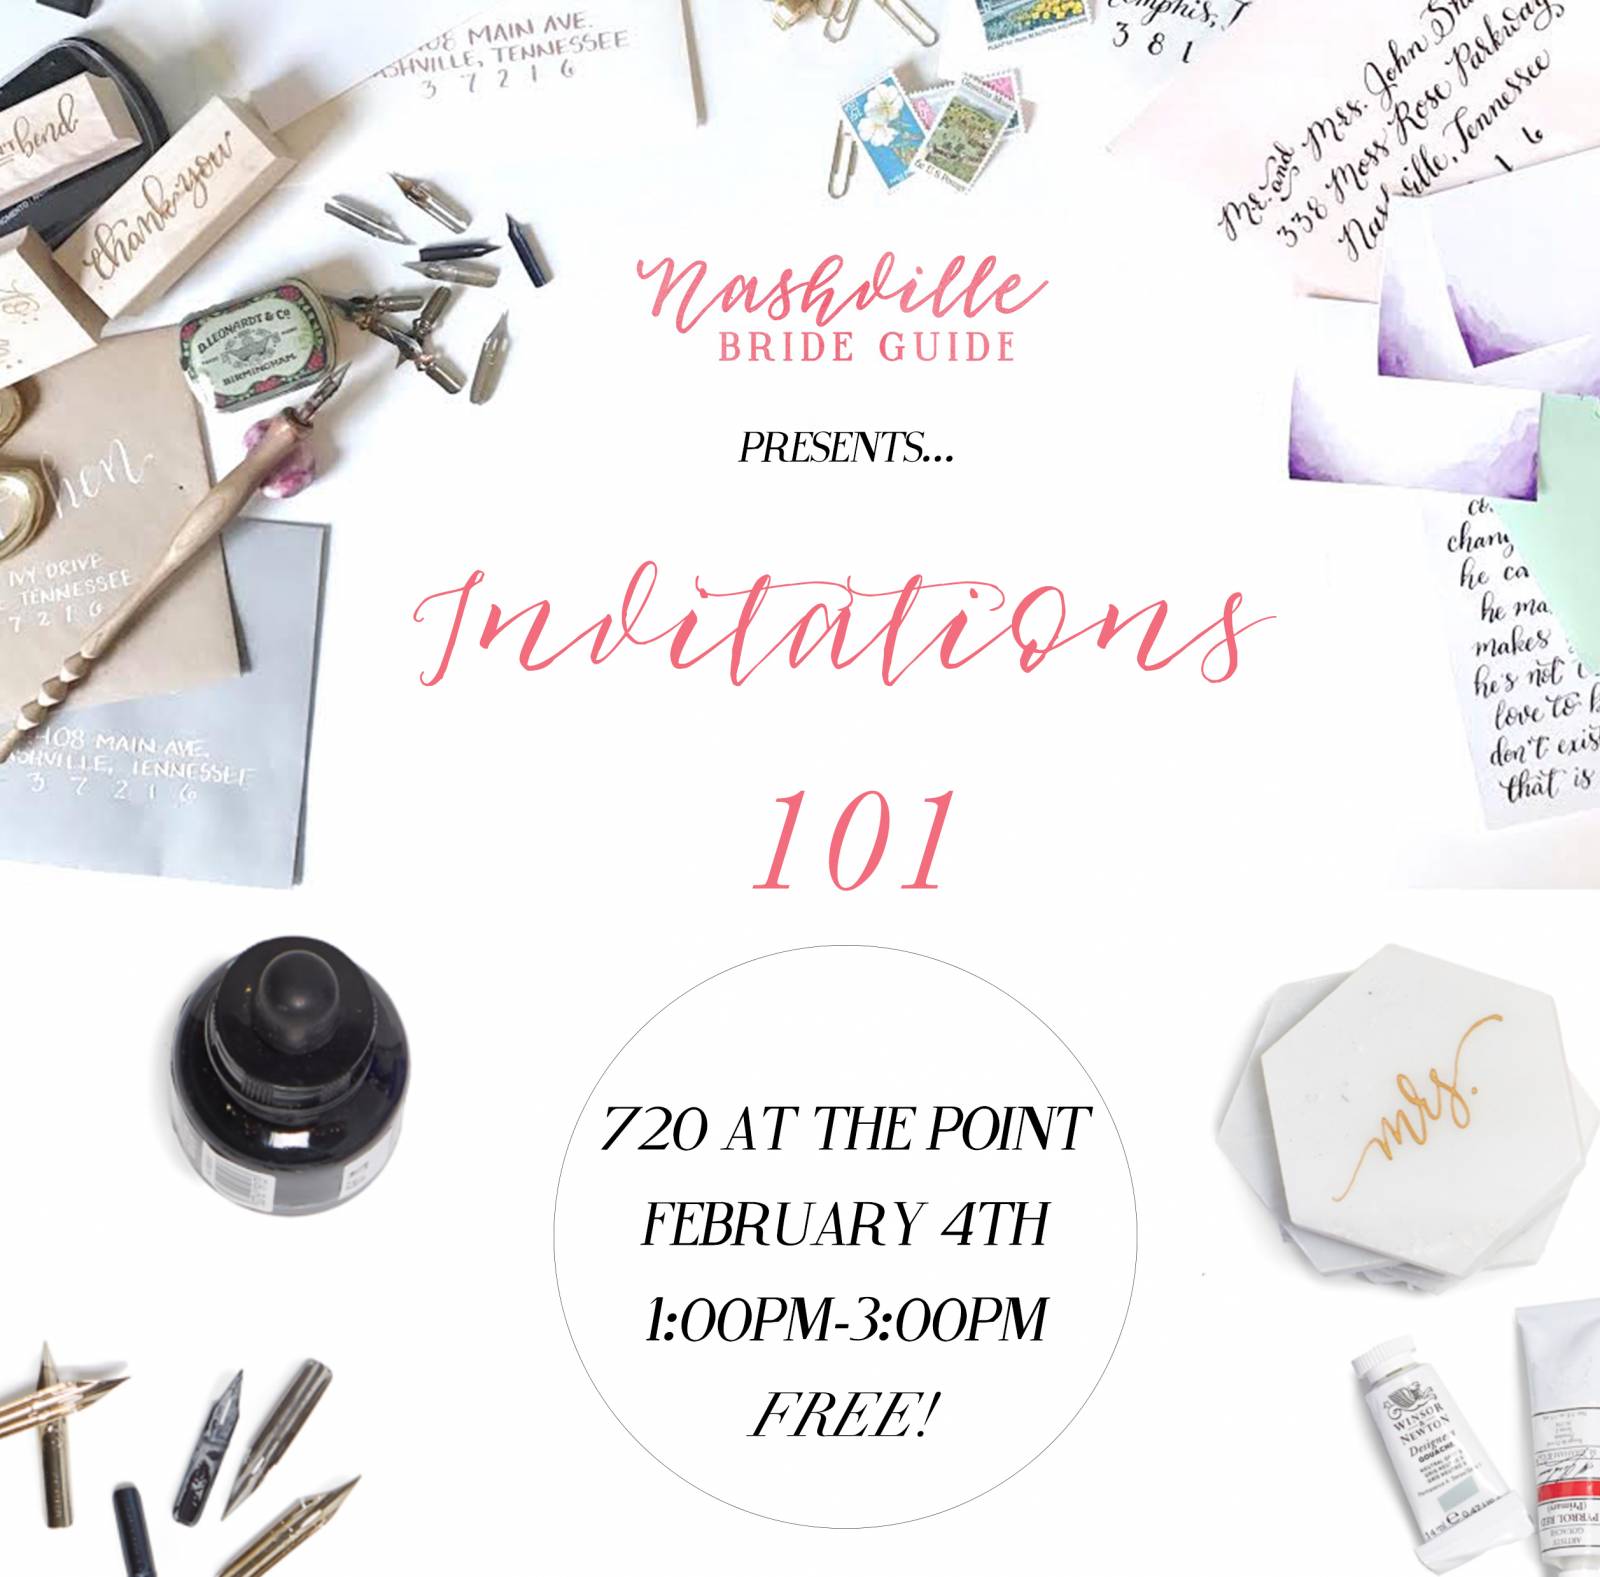 Nashville Bride Guide Presents: Invitations 101 Free Workshop for Brides with Paperkuts Studio, White Ink Calligraphy + Party Place Cards |  Nashville Bridal Shows & Events